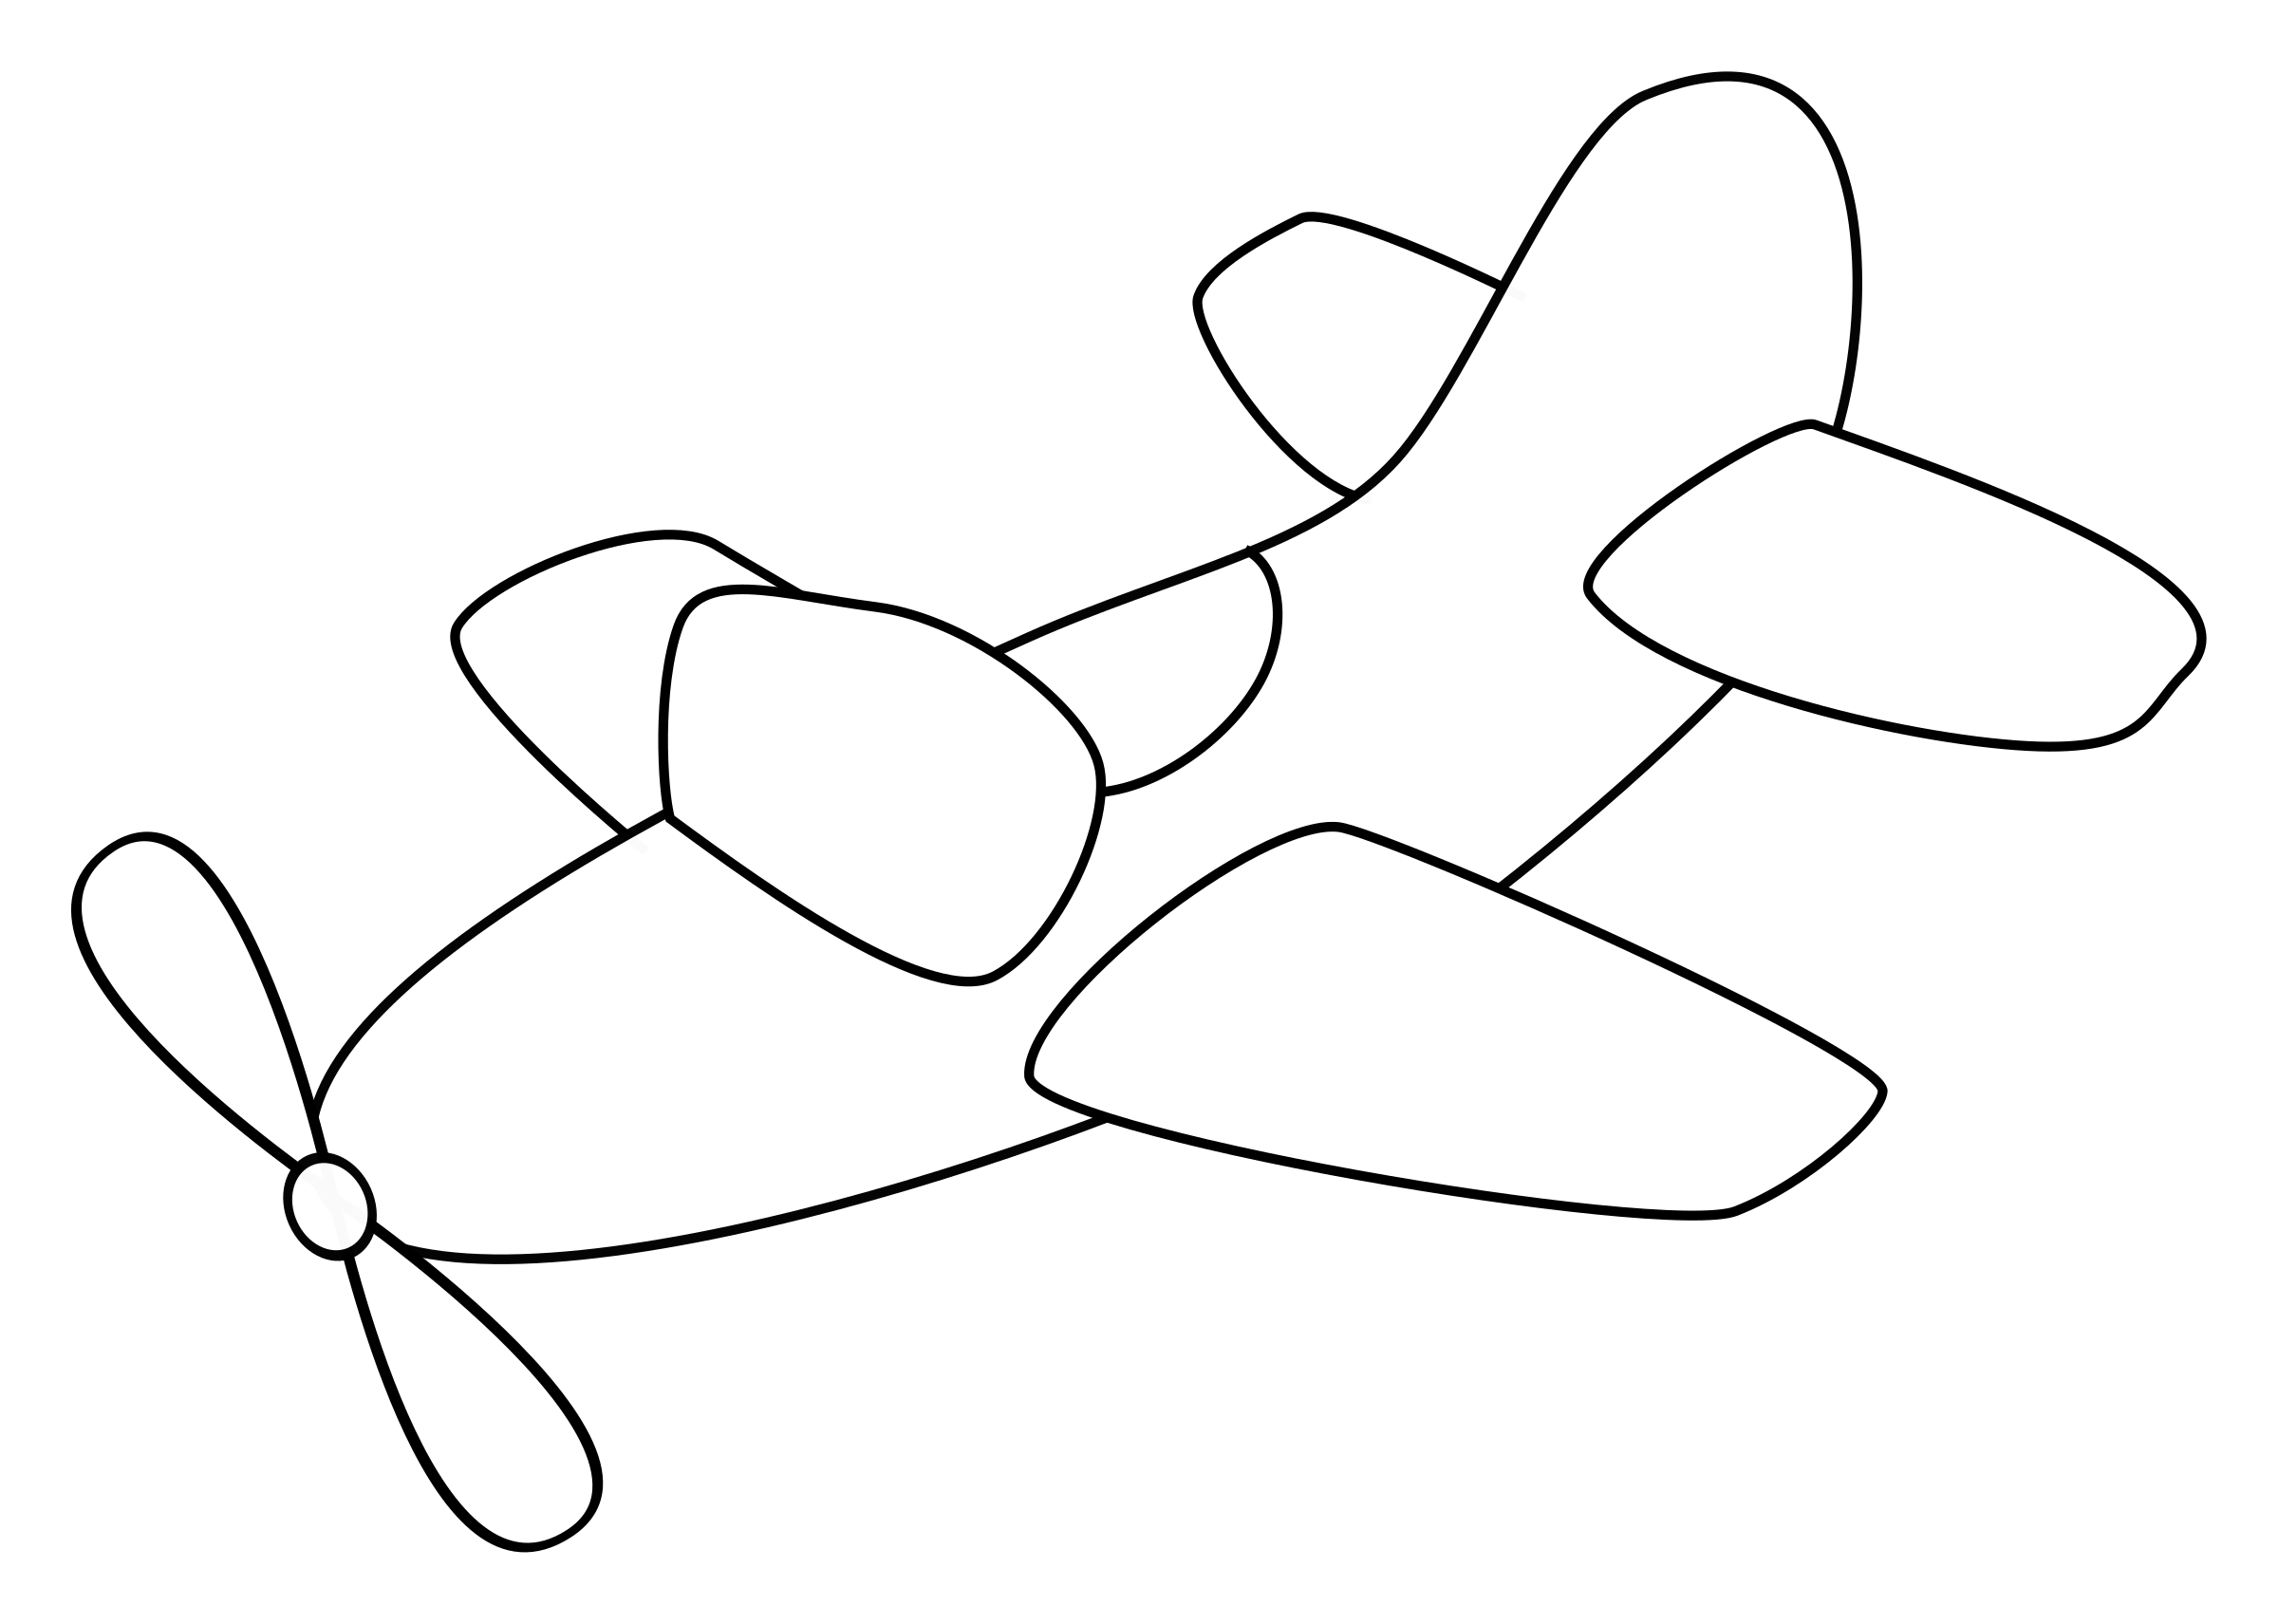 Airplane With Propeller   Outline By Spacefem